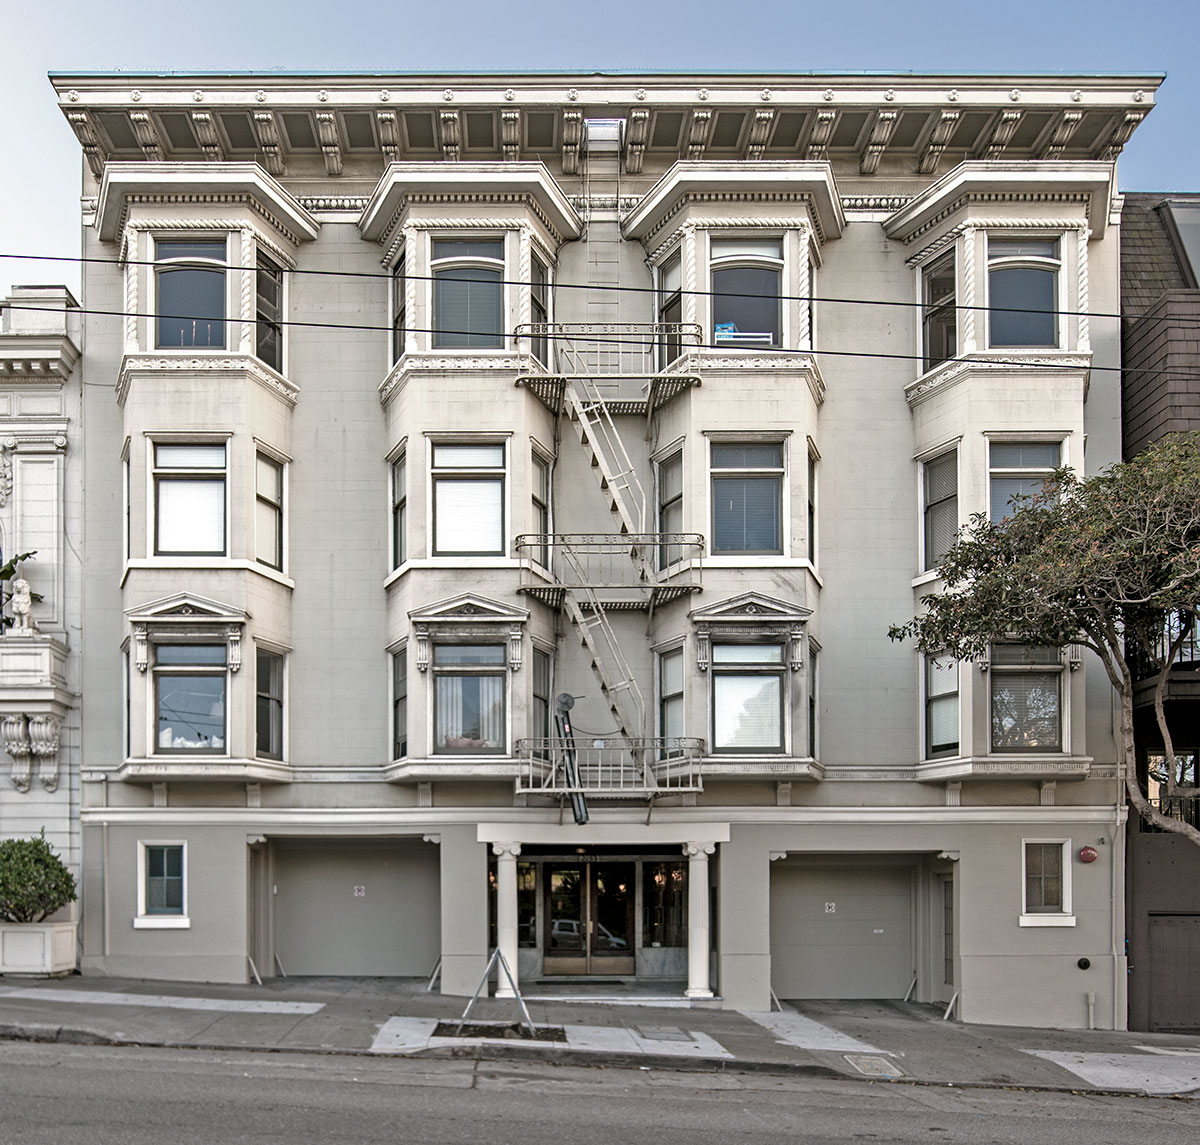 2153 Sacramento Street in Pacific Heights, designed by Edward E. Young, built 1912